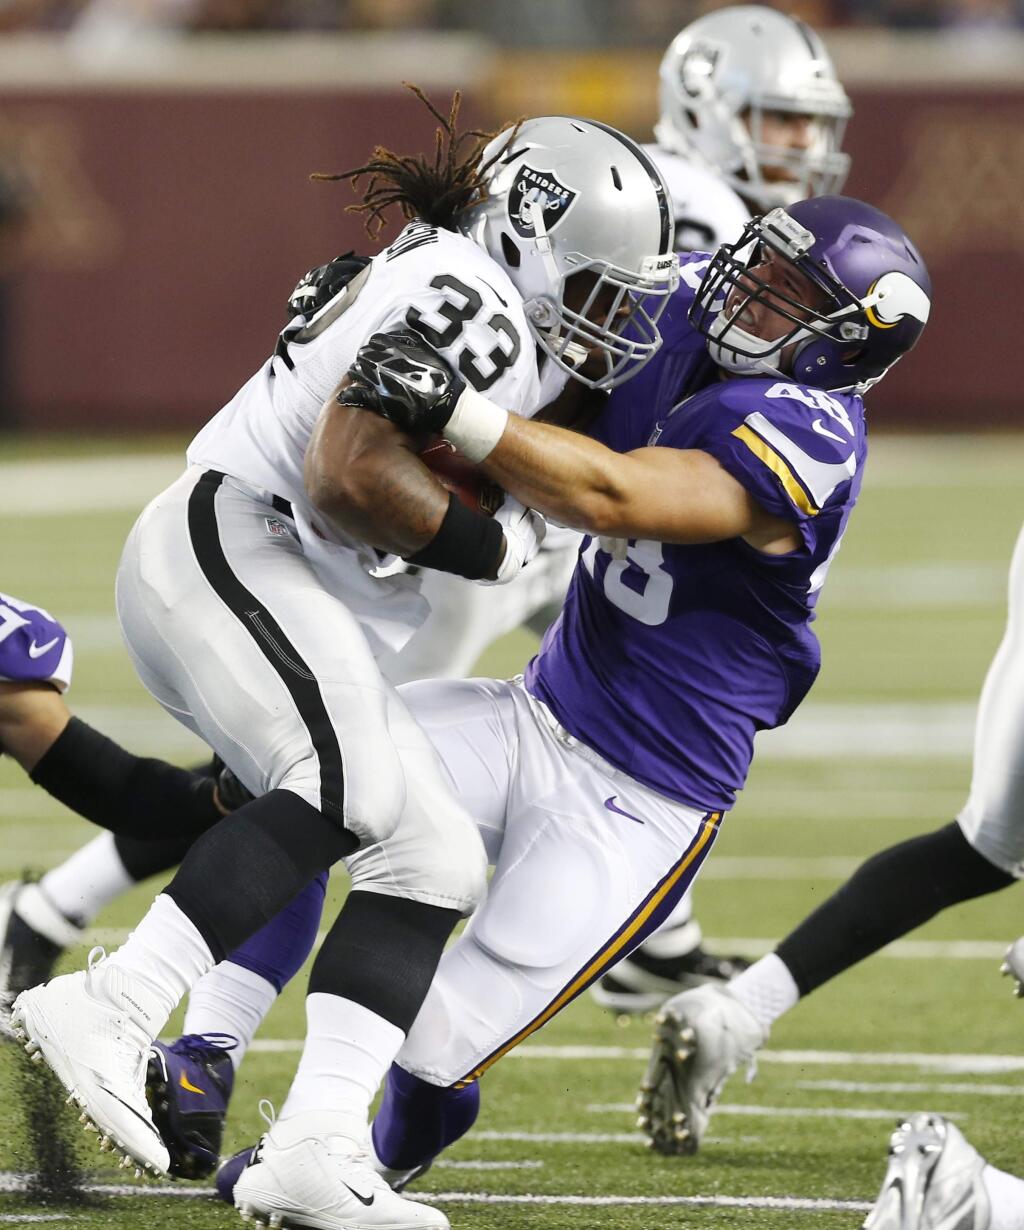 Oakland Raiders running back Trent Richardson (33) is stopped by Minnesota Vikings fullback Zach Line during the first half of a preseason NFL football game, Saturday, Aug. 22, 2015, in Minneapolis. (AP Photo/Jim Mone)